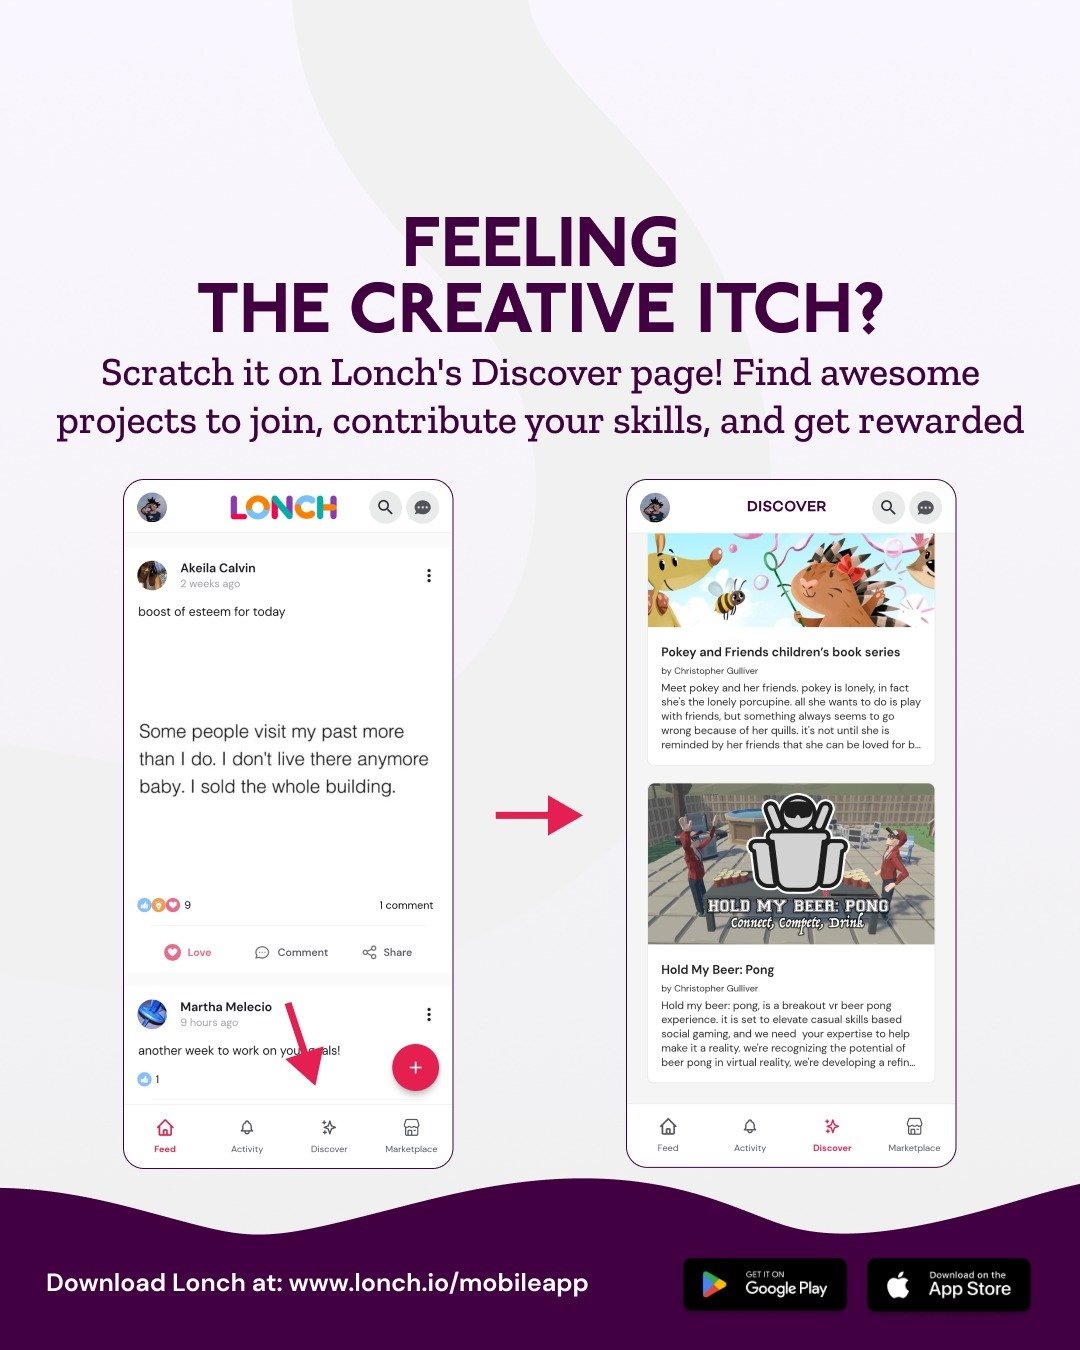 **Feeling the creative itch? Scratch it on Lonch's Discover page! **

Find awesome projects to join forces with, contribute your skills, and get rewarded for your awesomeness. No project of your own yet? No sweat! The Discover page is bursting with i